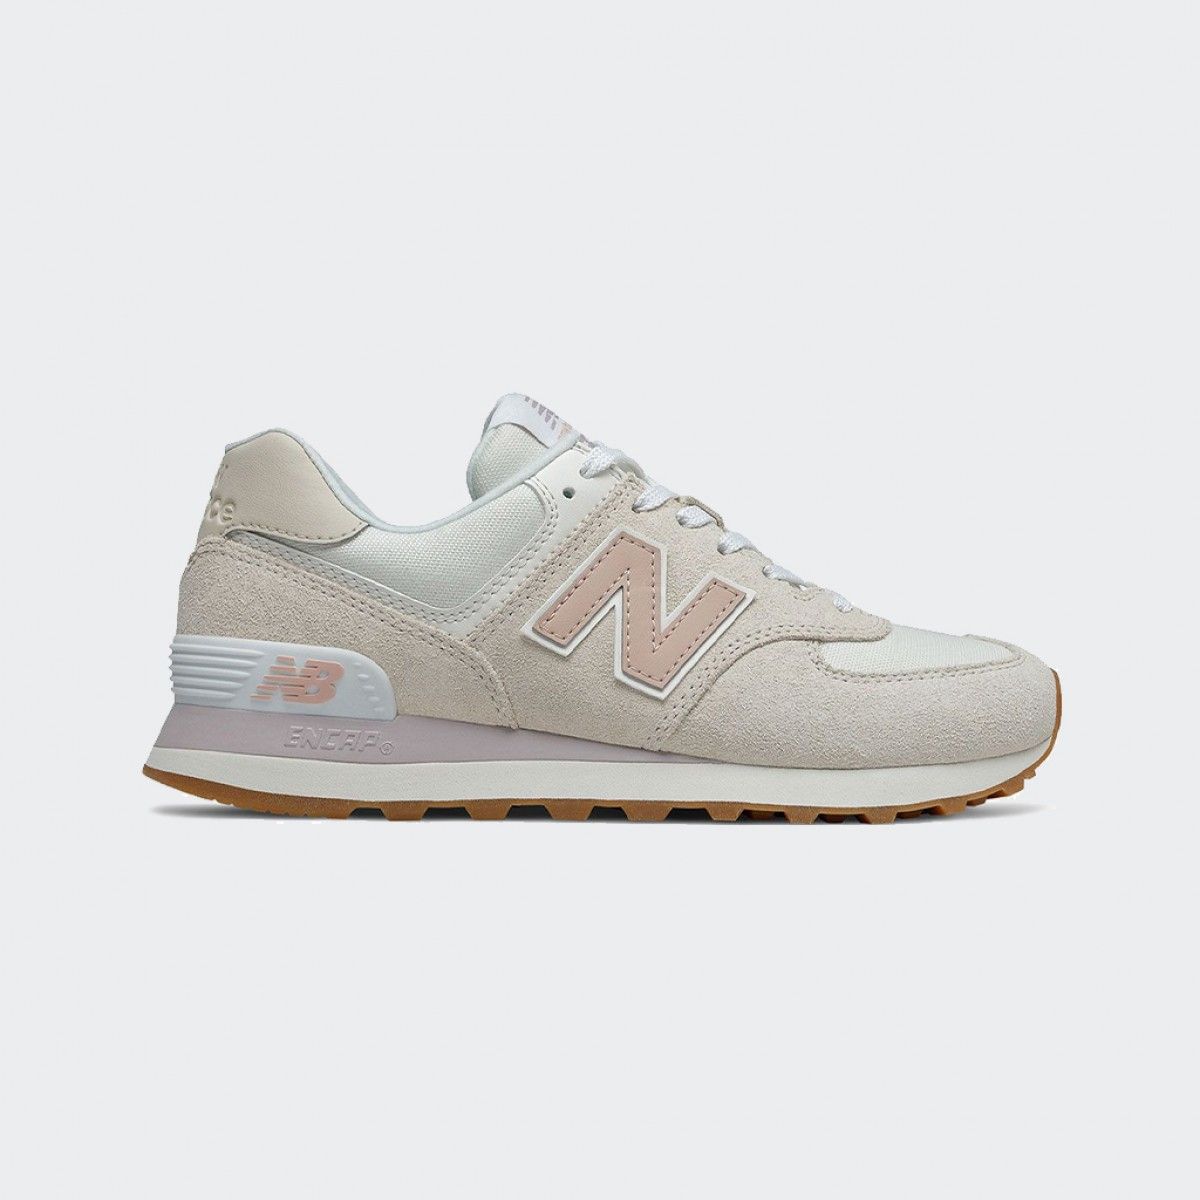 New Balance 574 Sneakers for Women - Beige | Urban Project | Urban Project